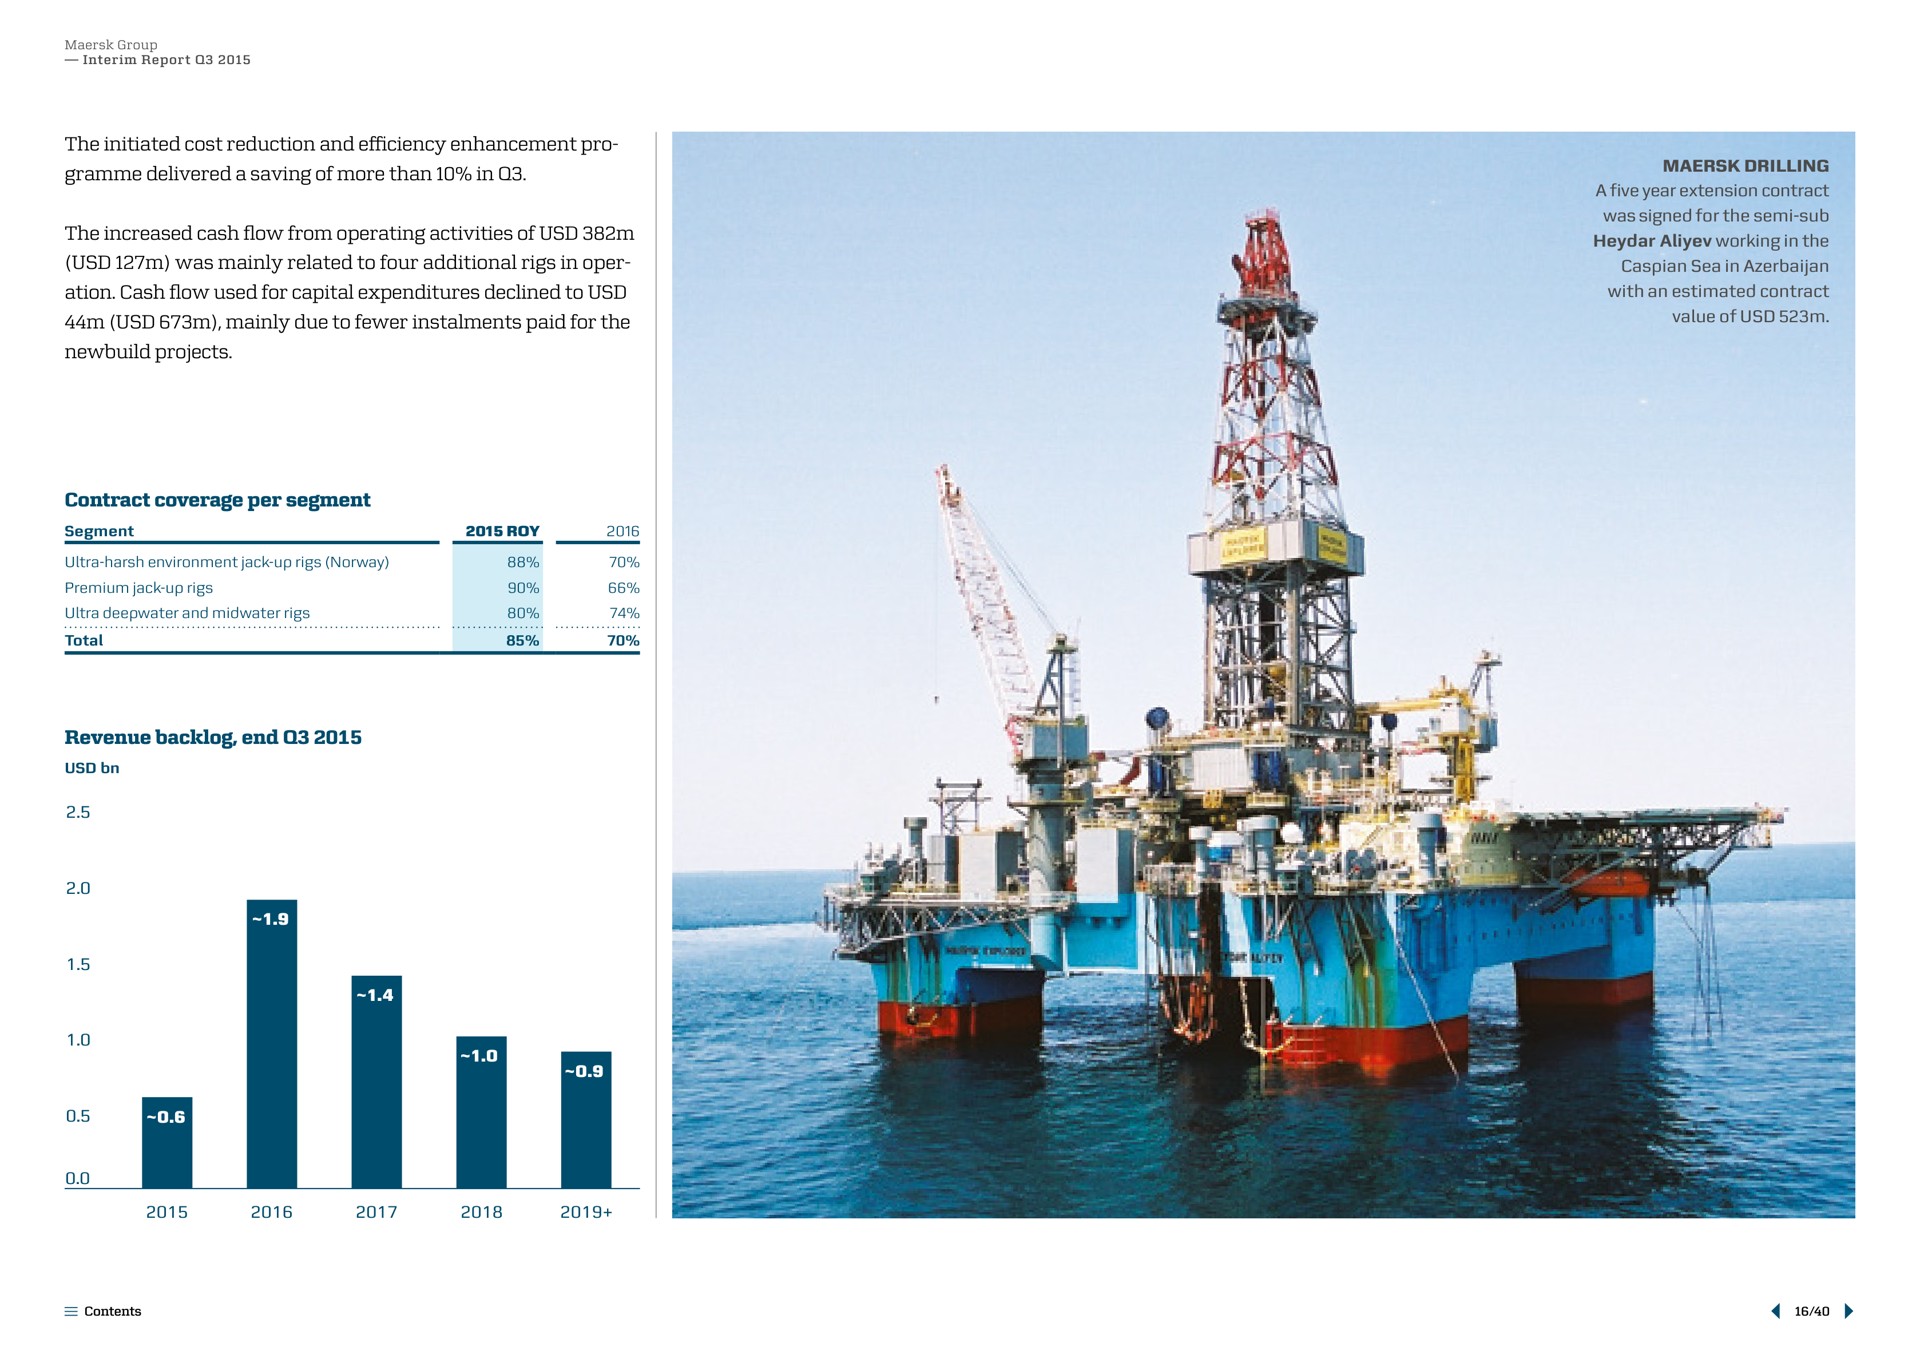 gramme delivered a saving of more than in the increased cash flow from operating activities of was mainly related to four additional rigs in contract coverage per segment revenue backlog end | Maersk